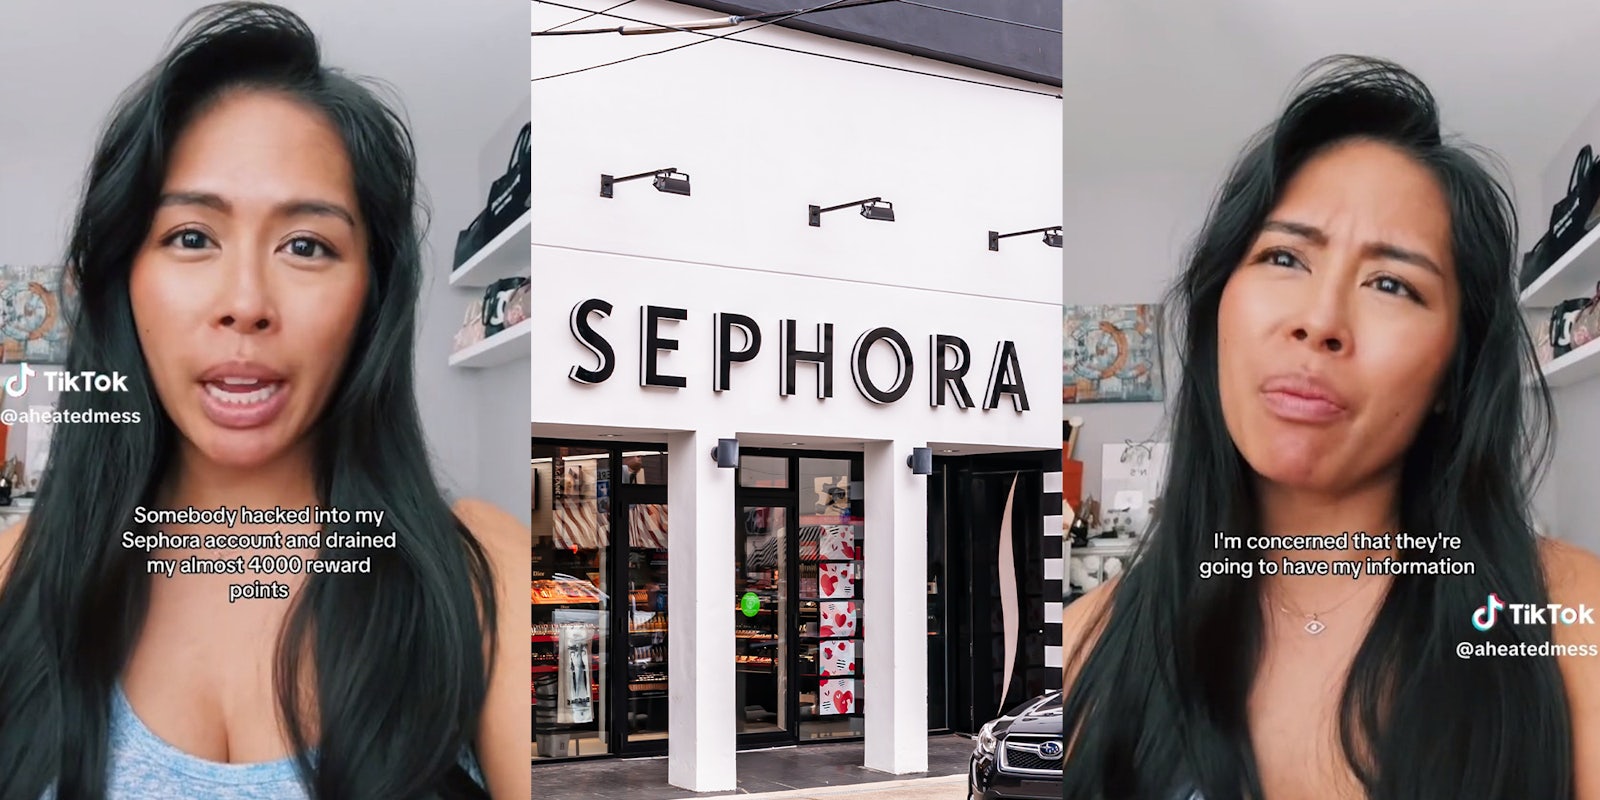 Sephora customer gets hacked and loses 4,000 rewards points